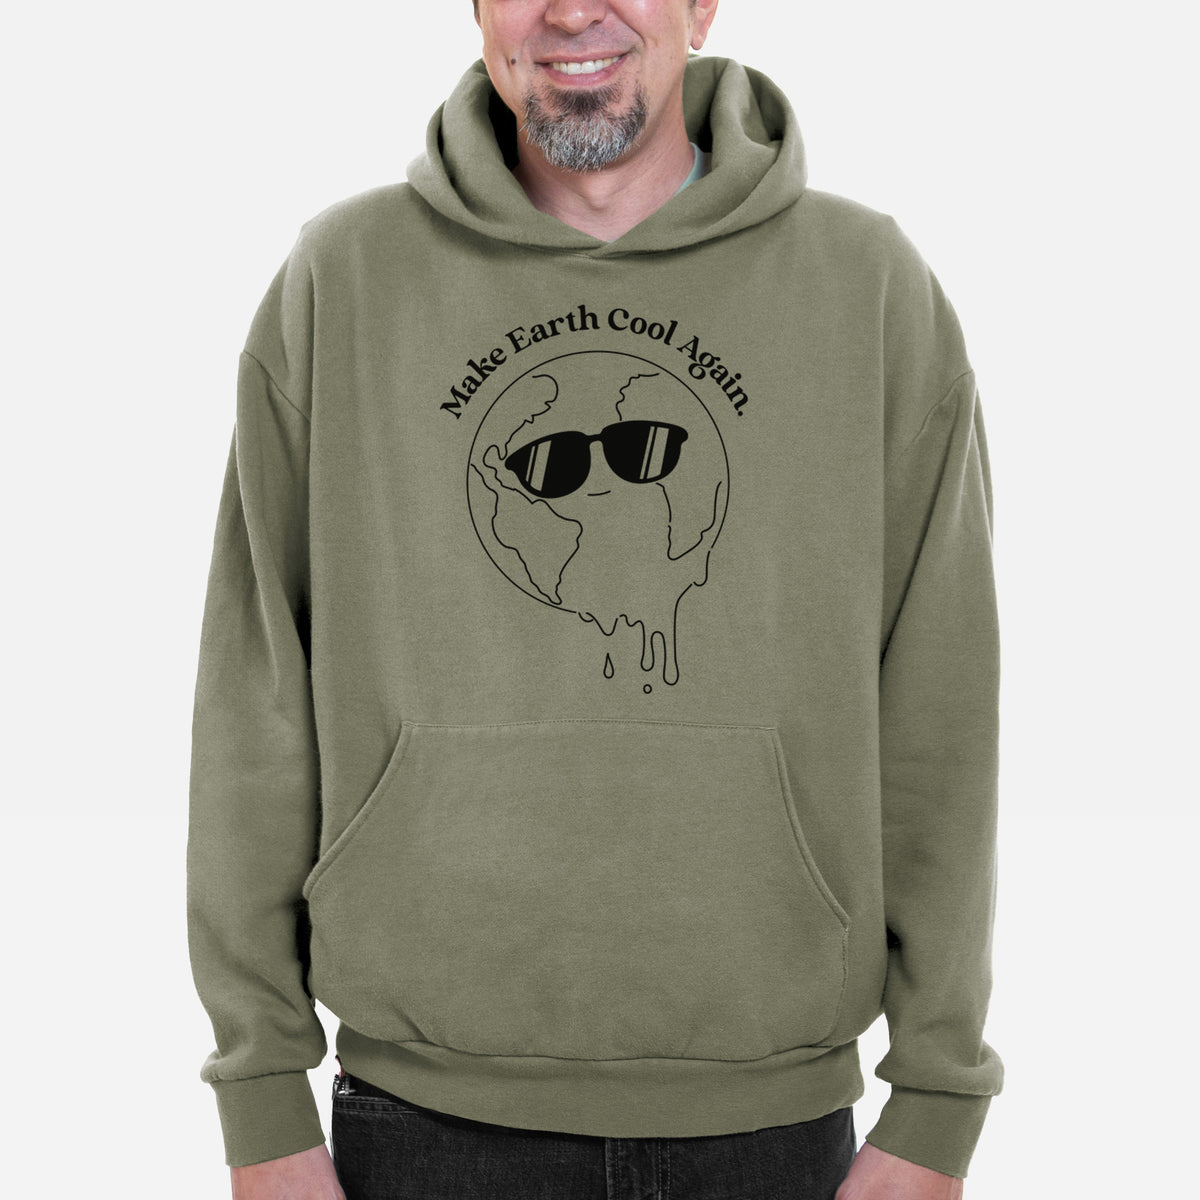 Make Earth Cool Again - Melted Planet  - Bodega Midweight Hoodie